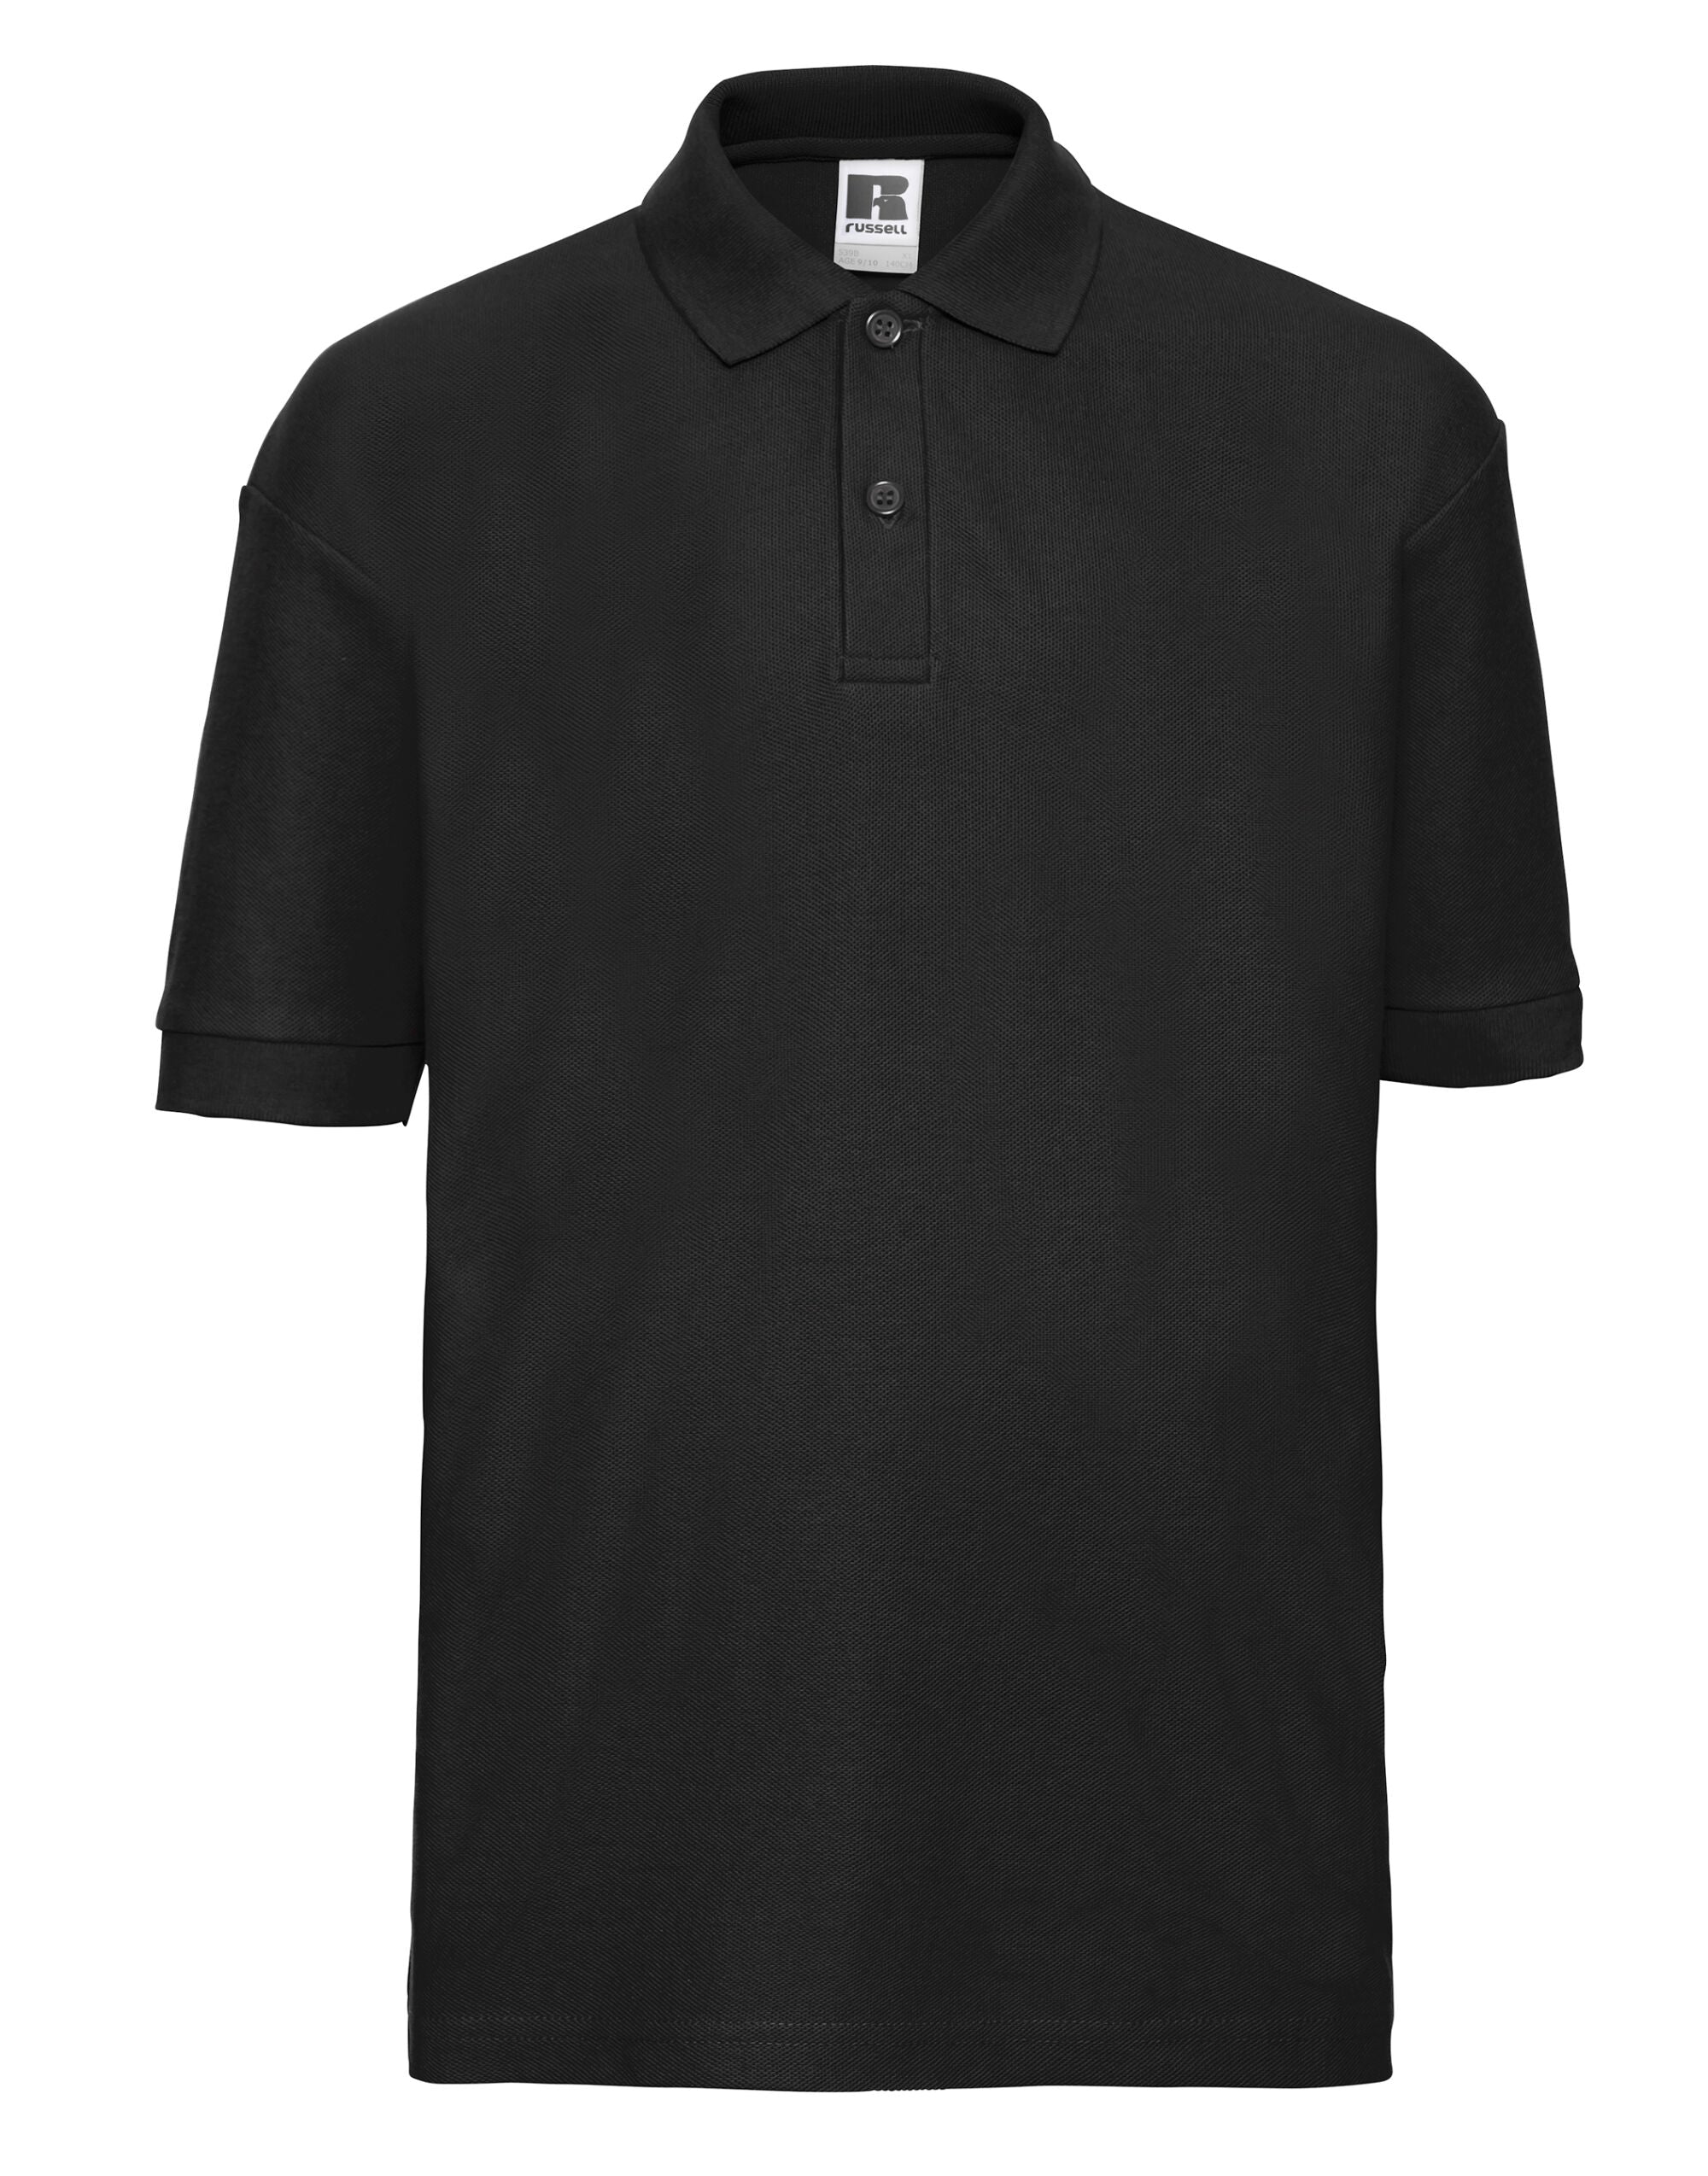 Russell Jerzees Schoolgear Children's Classic Polycotton Polo The double yarn construction creates a very durable and hardwearing fibre (539B)